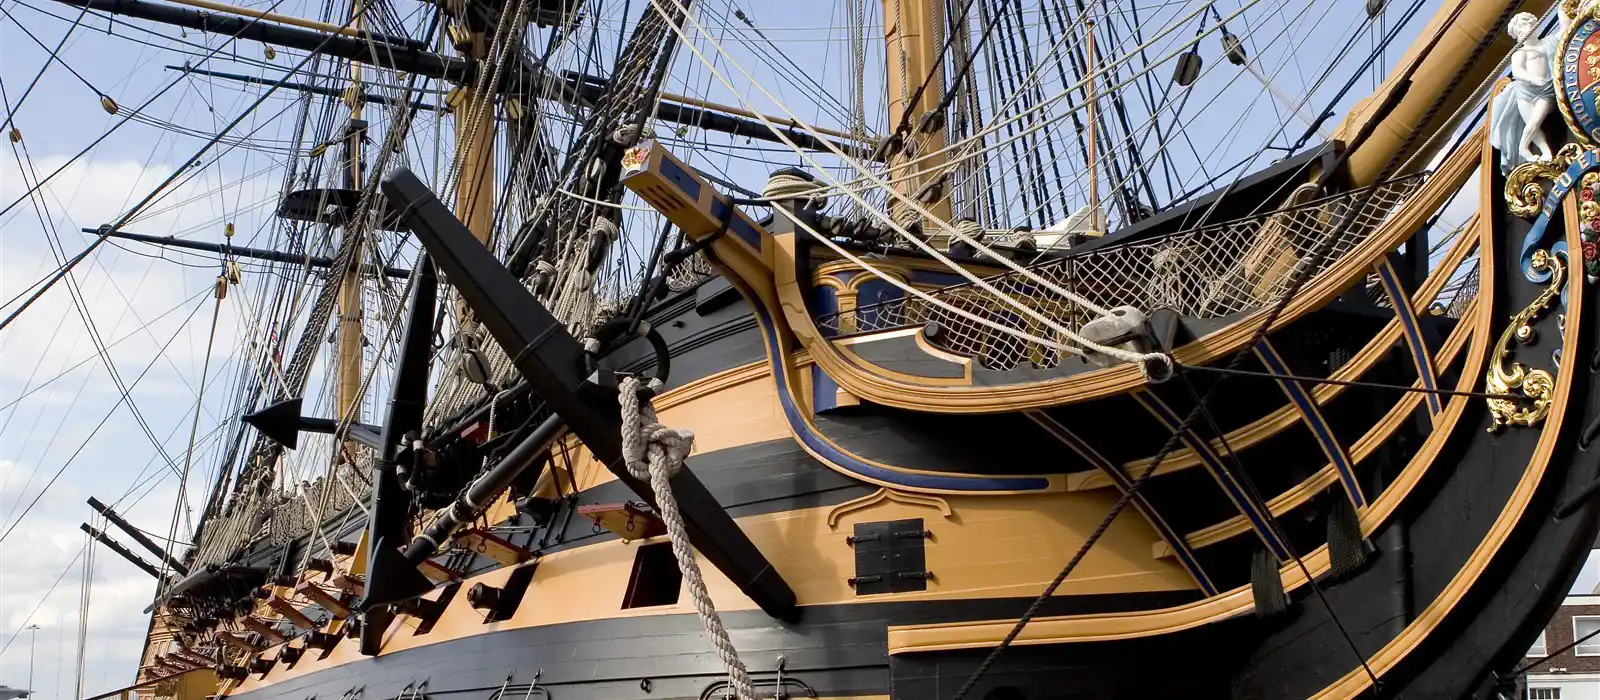 HMS Victory in the Portsmouth Historic Dockyard